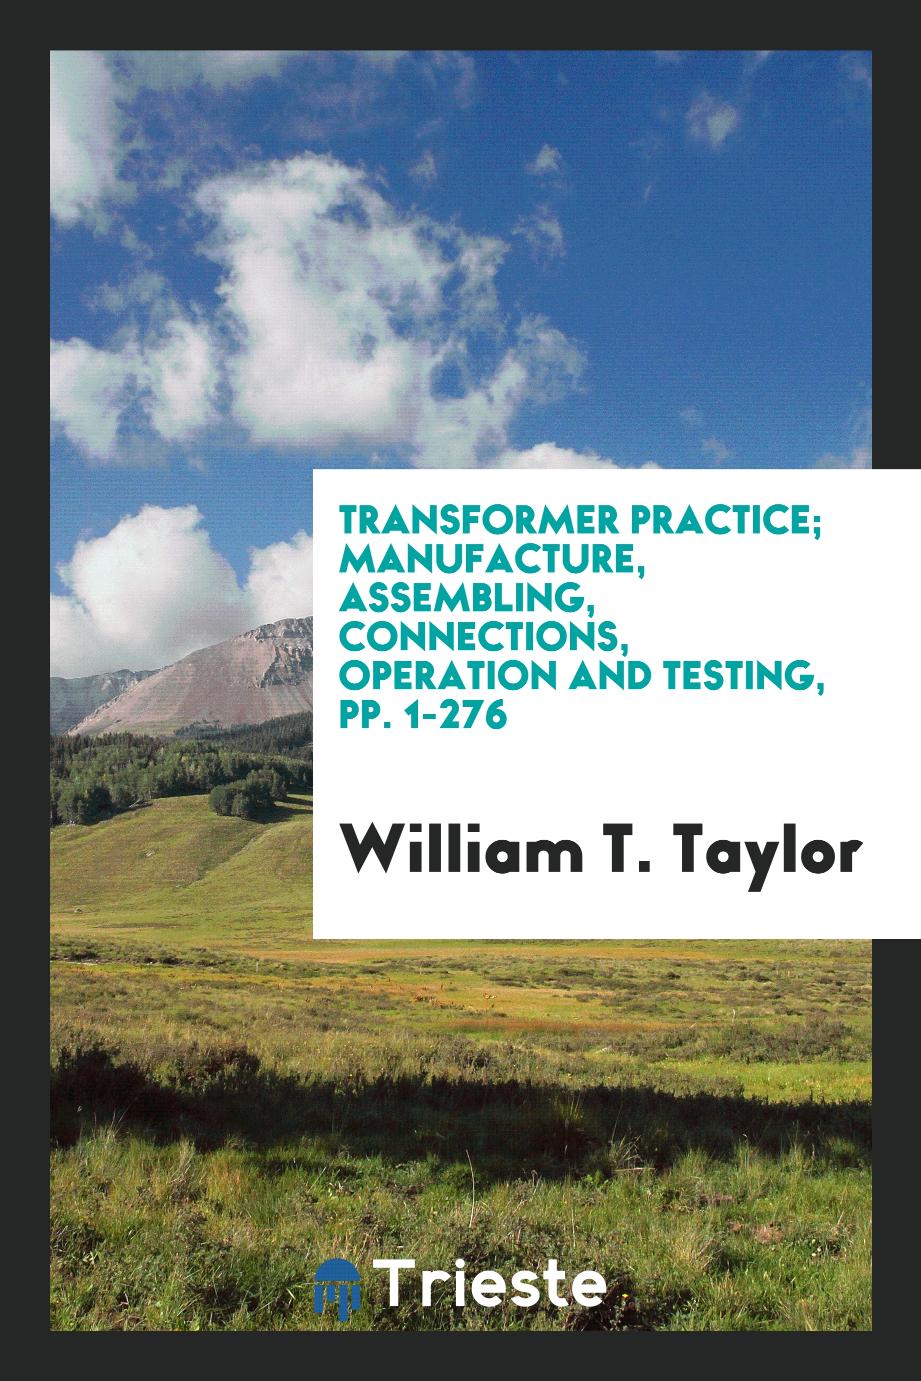 Transformer Practice; Manufacture, Assembling, Connections, Operation and Testing, pp. 1-276